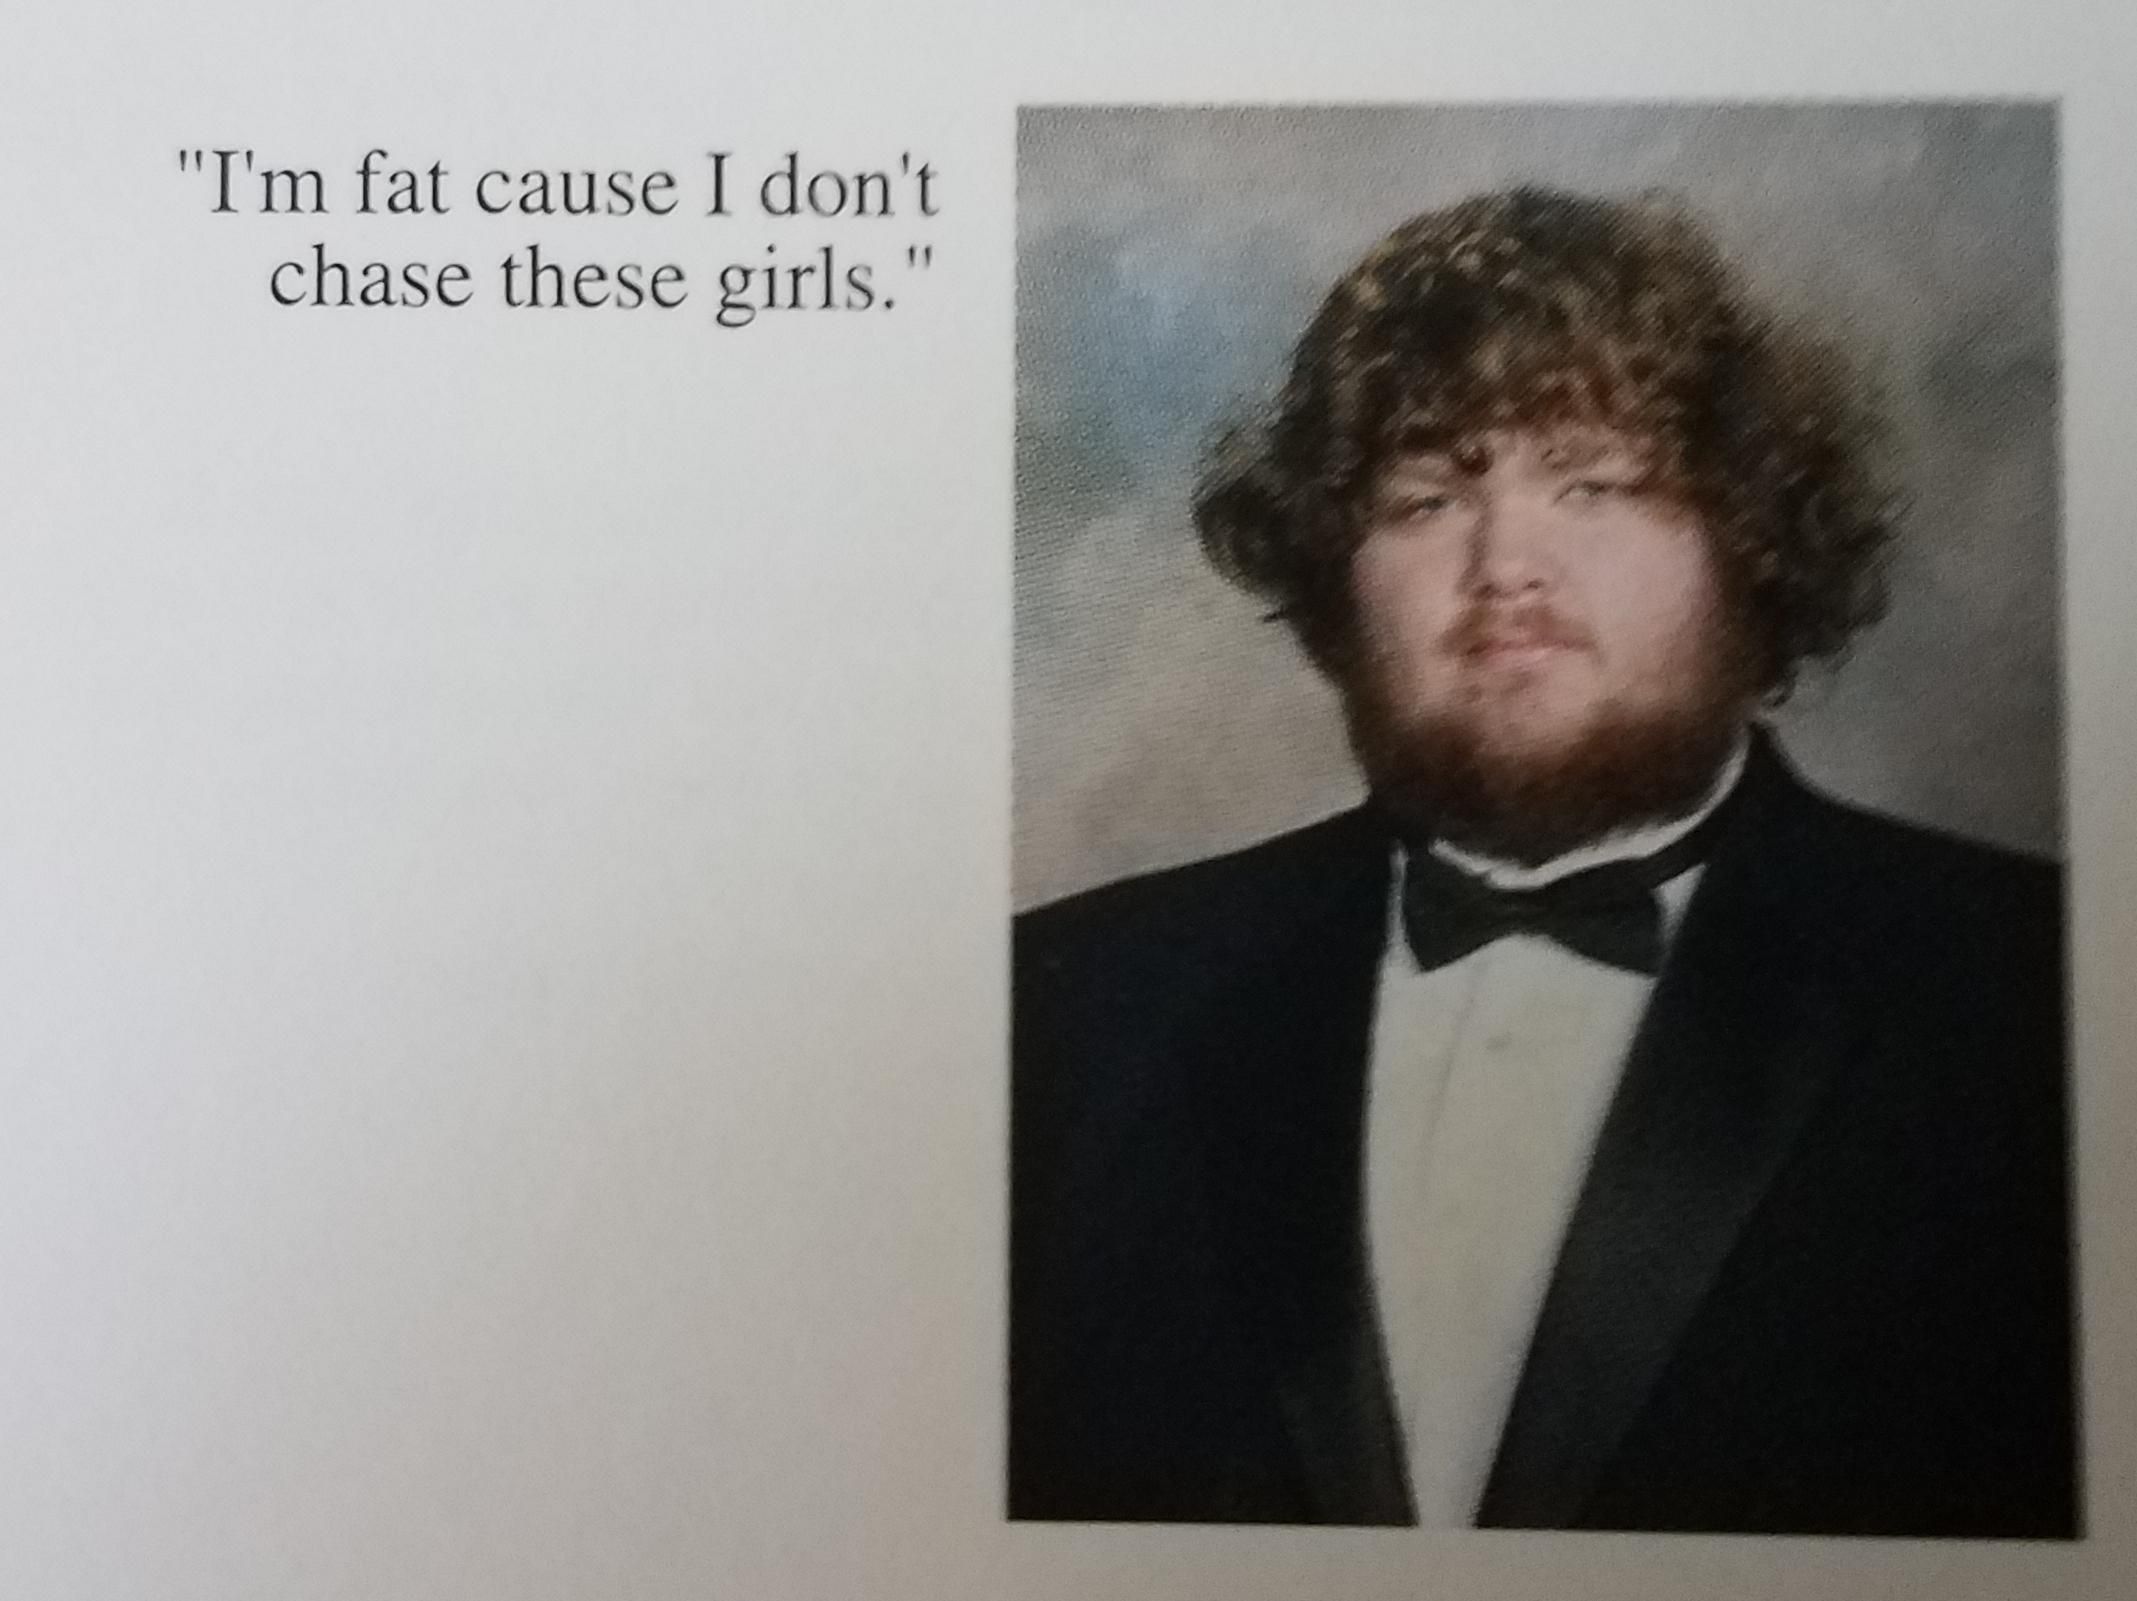 My brother graduated yesterday, here was his senior quote in his yearbook.